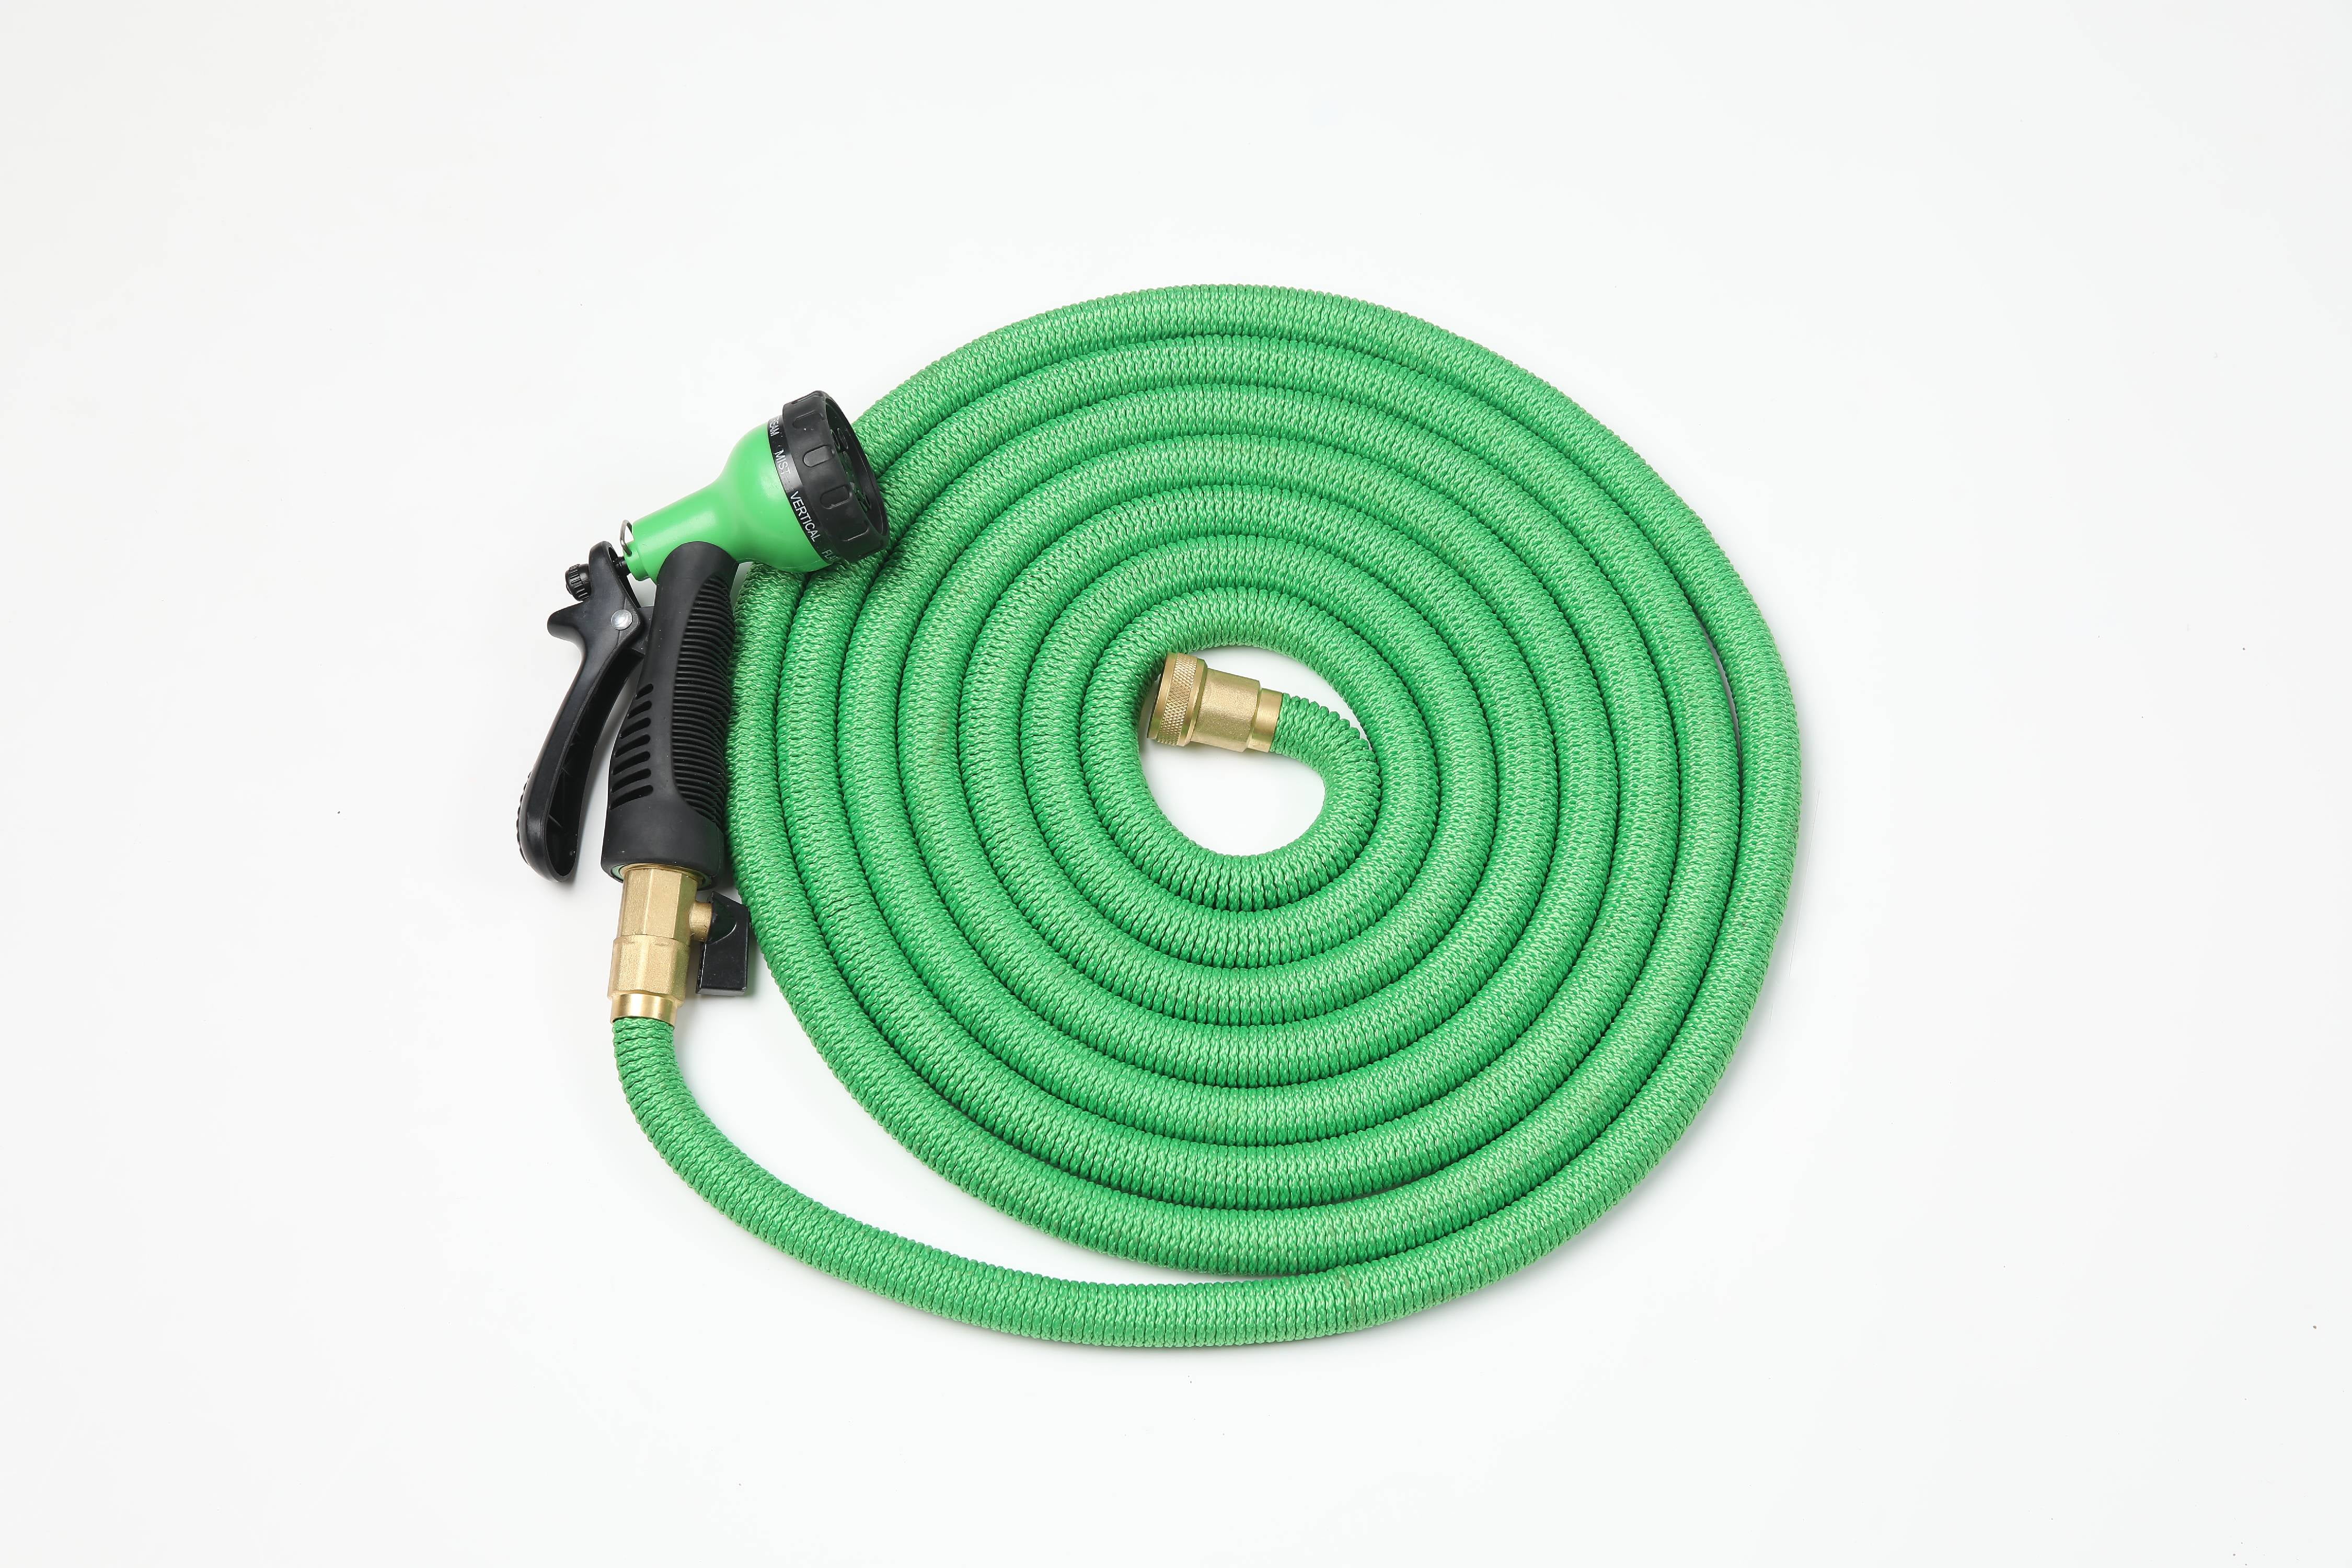 JGB 001-0101-0600 5/8" x 50' ft Red Kink Free Perfect Garden Hose 